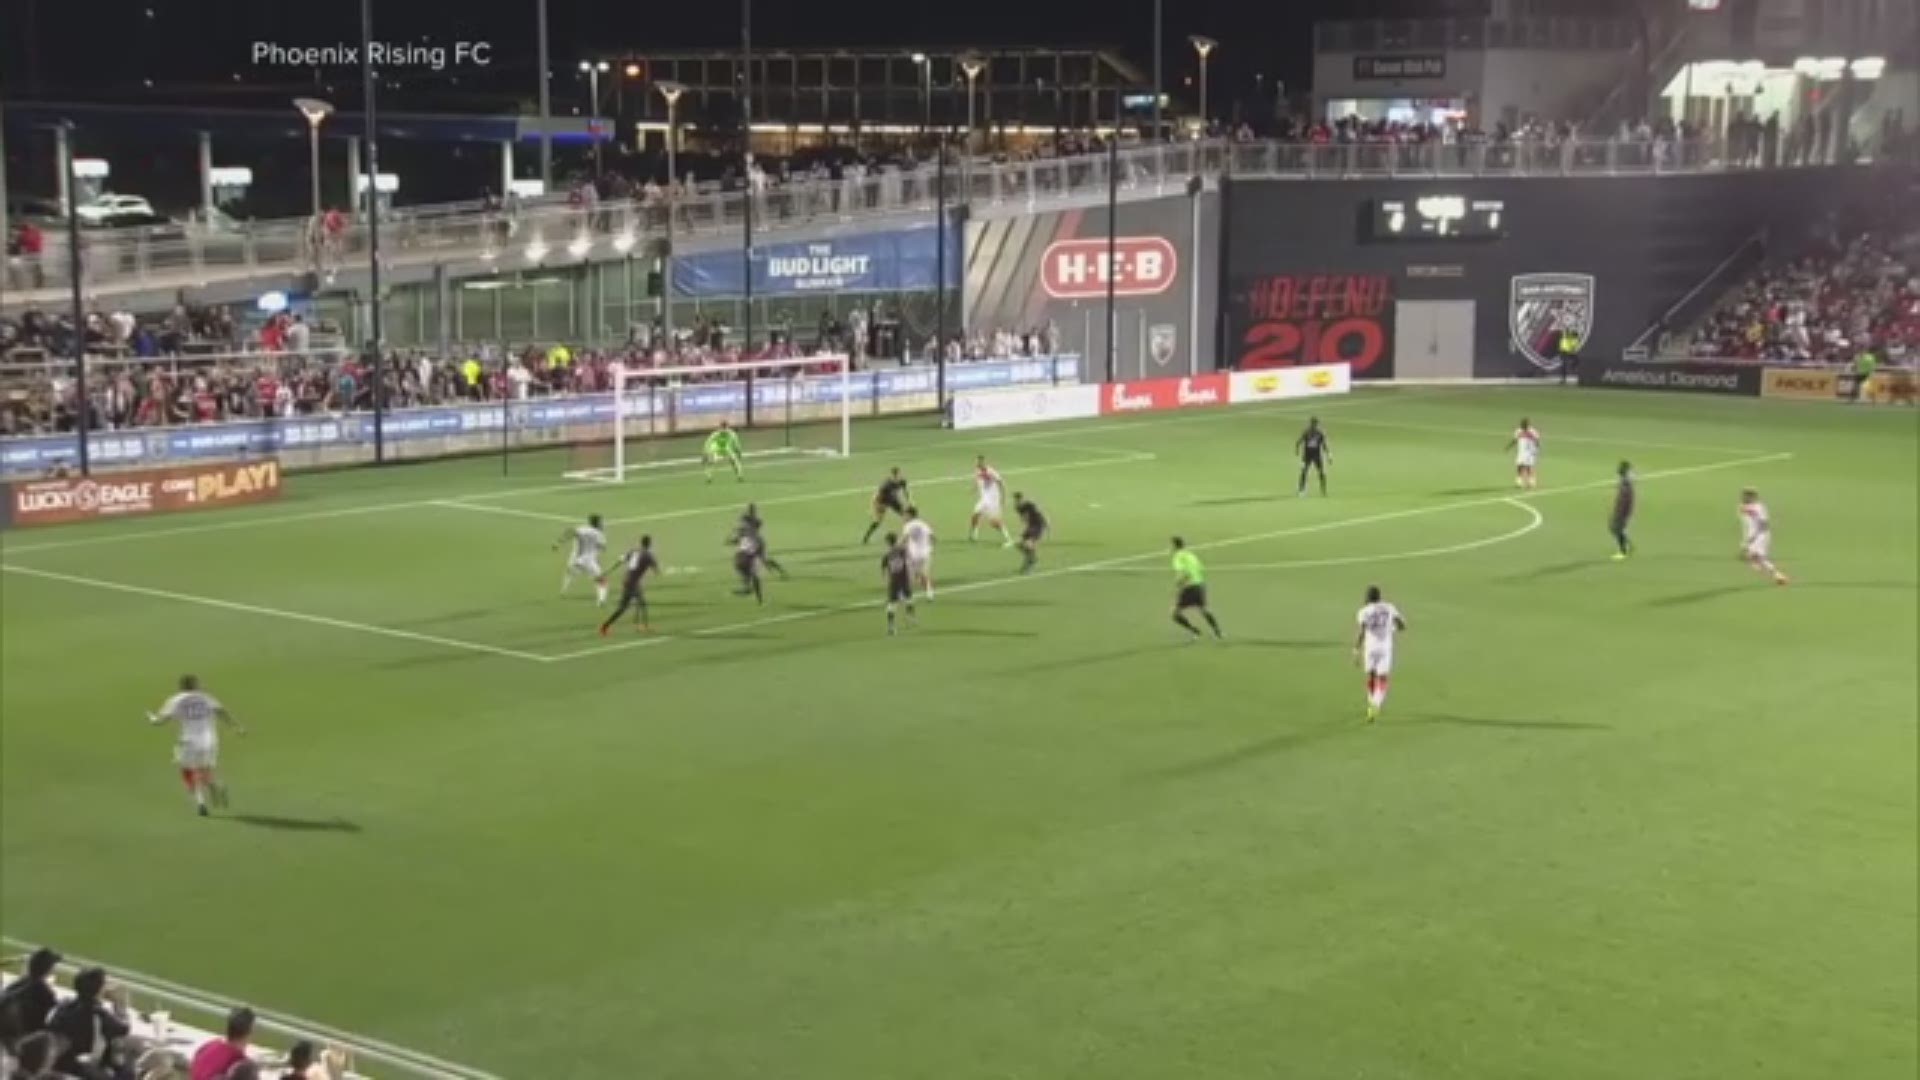 Take a look back at three amazing goals Phoenix Rising scored against San Antonio! This content is sponsored by the Phoenix Rising FC.